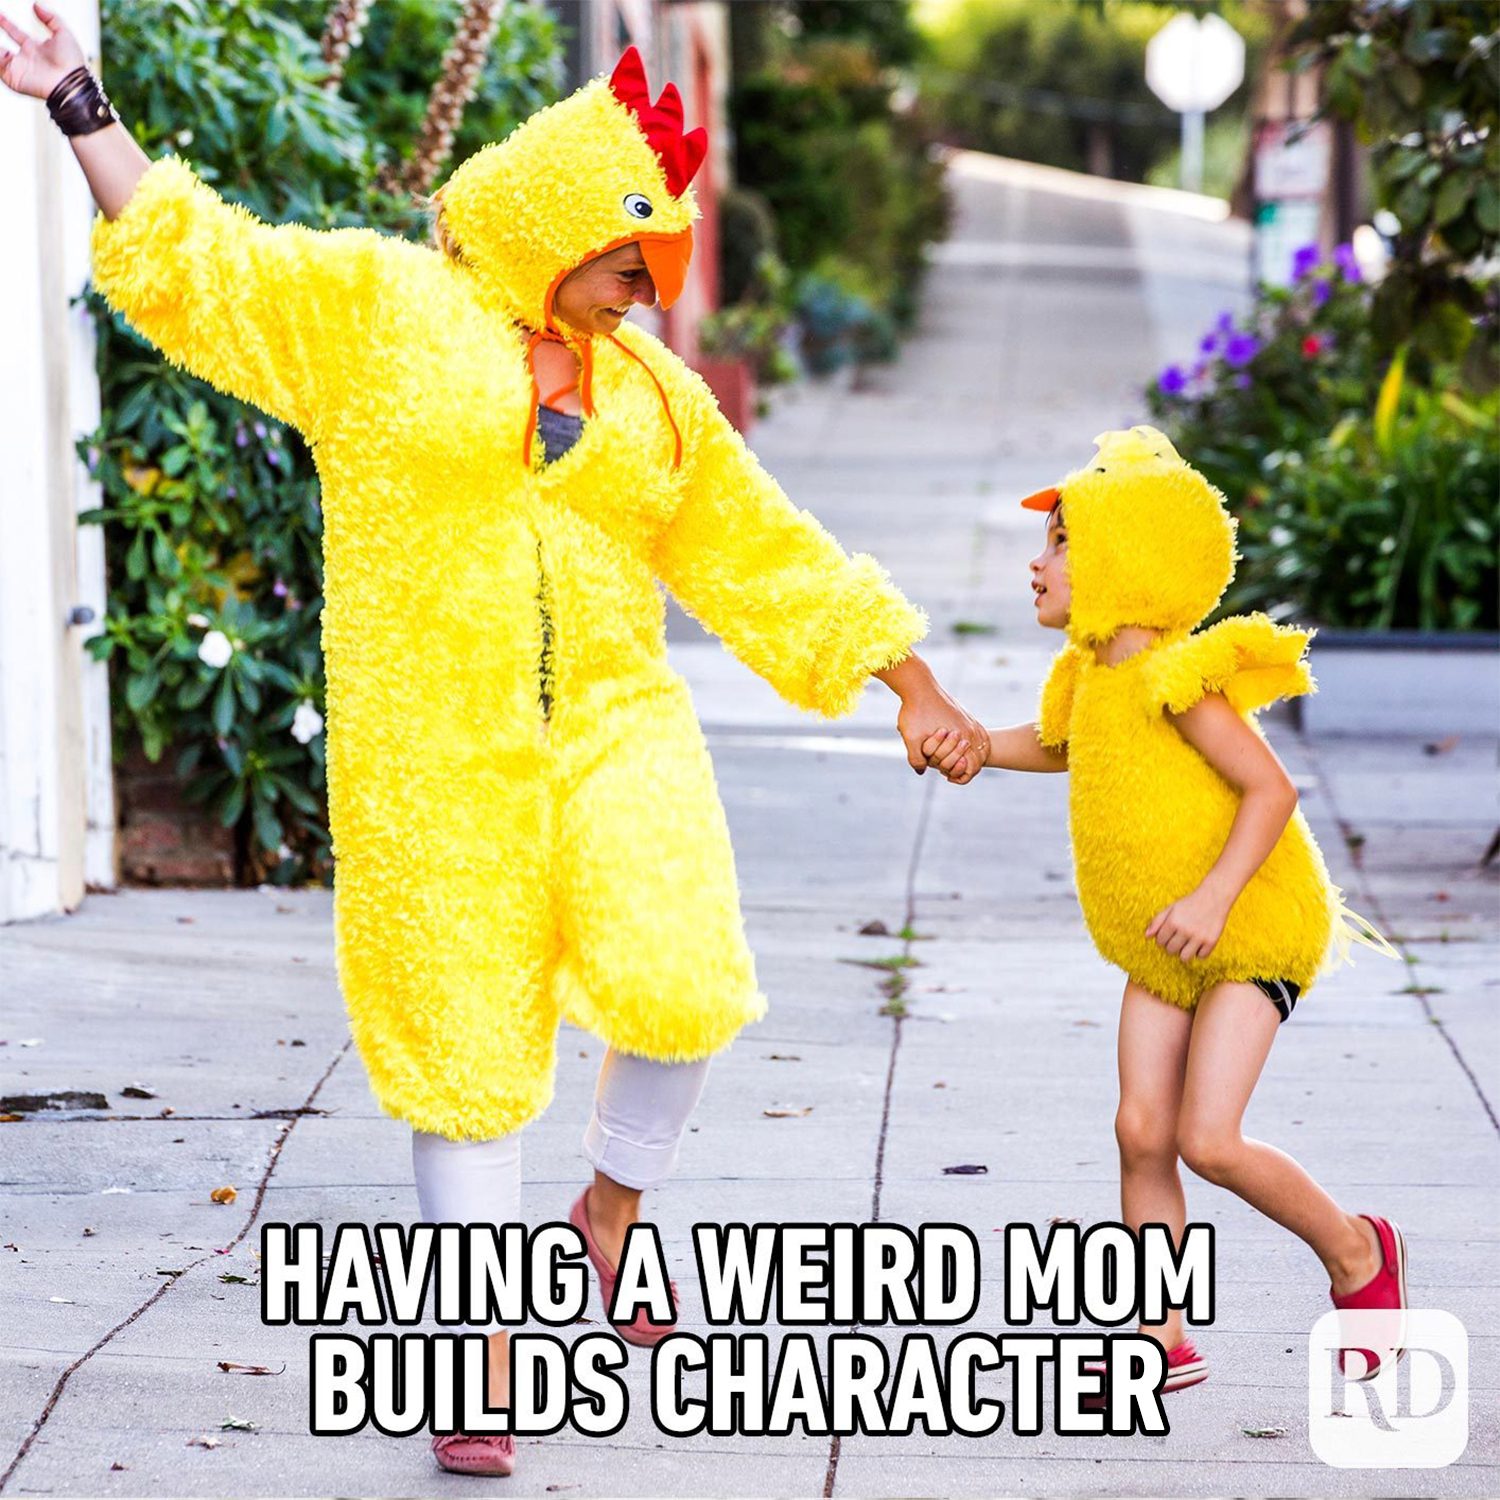 Mom and daughter in chicken costumes MEME TEXT: Having a weird mom builds character